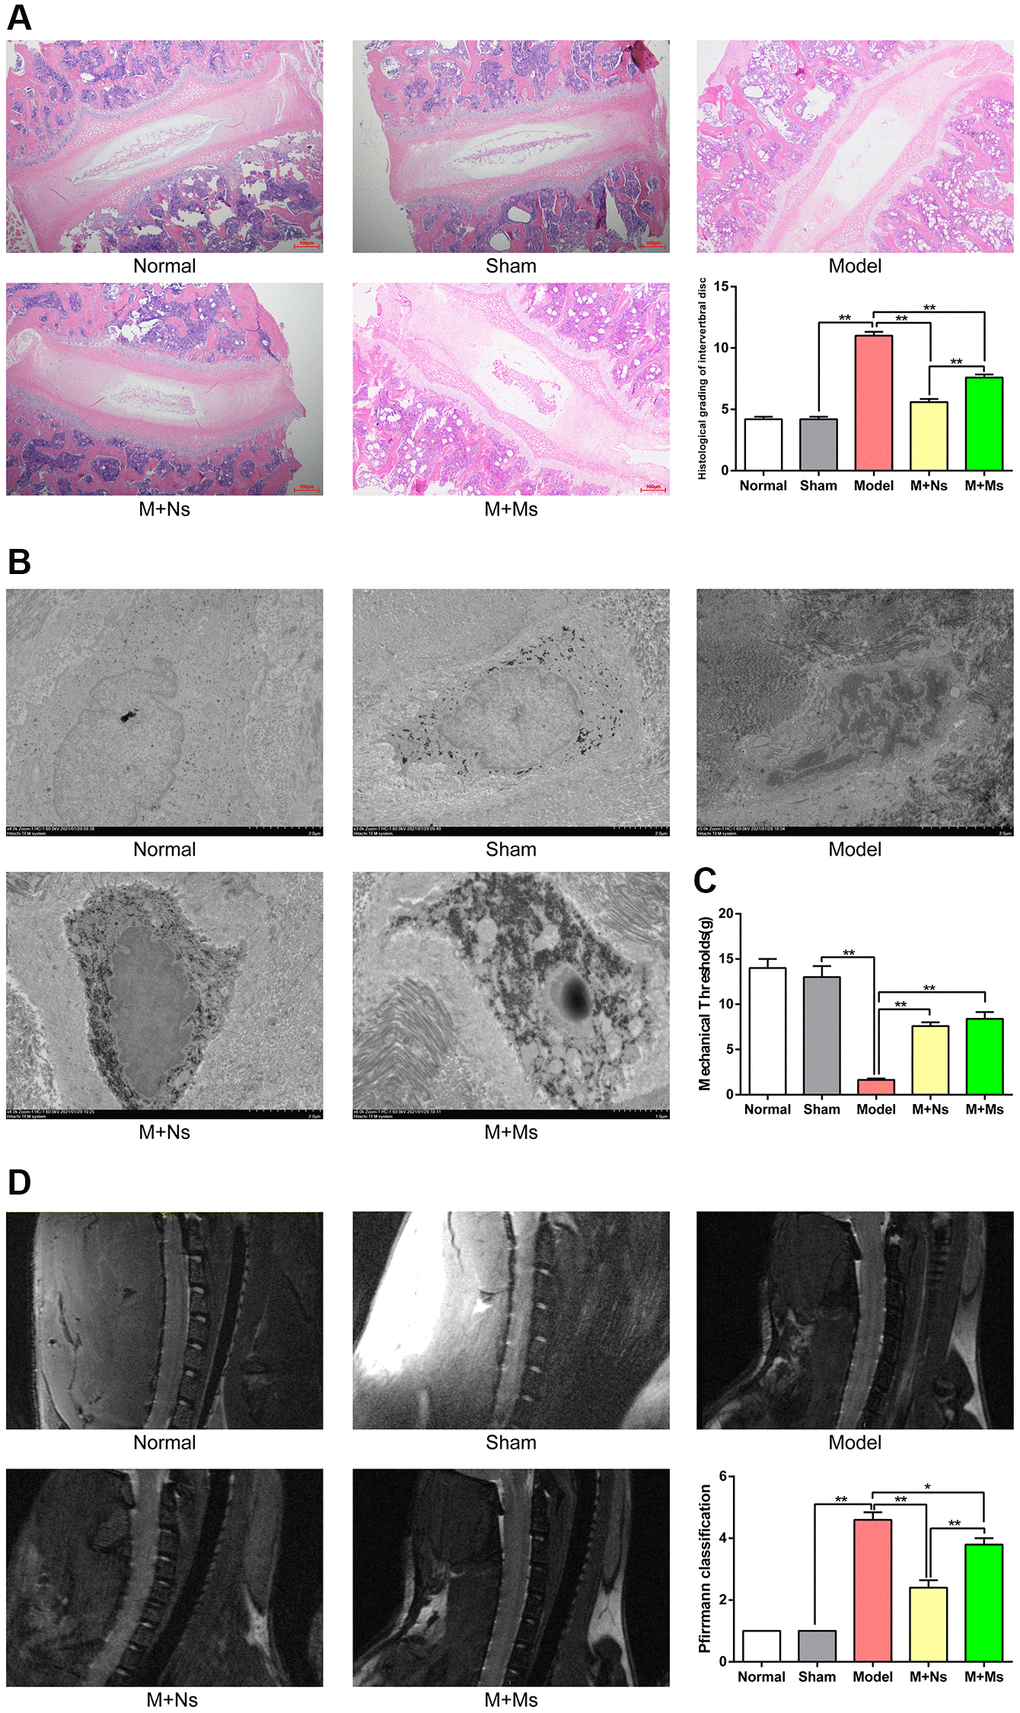 The therapy of Ns affected intervertebral disc degeneration in the intervertebral disc of CS rats. (A) H&E staining of cervical intervertebral disc in different groups 4 weeks after intervening, note: scale bar = 100 um. (B) Transmission electron microscope of the nucleus pulposus in different groups 4 weeks after intervening, note: scale bar = 2 um. (C) The neck-skin response thresholds to the mechanical stimuli applied by von Frey filaments in different groups 4 weeks after intervening. (D) Pfirrmann MRI Grades in different groups 4 weeks after intervening. Note: values are means ± SEMs, n = 5 per group, *p **p 